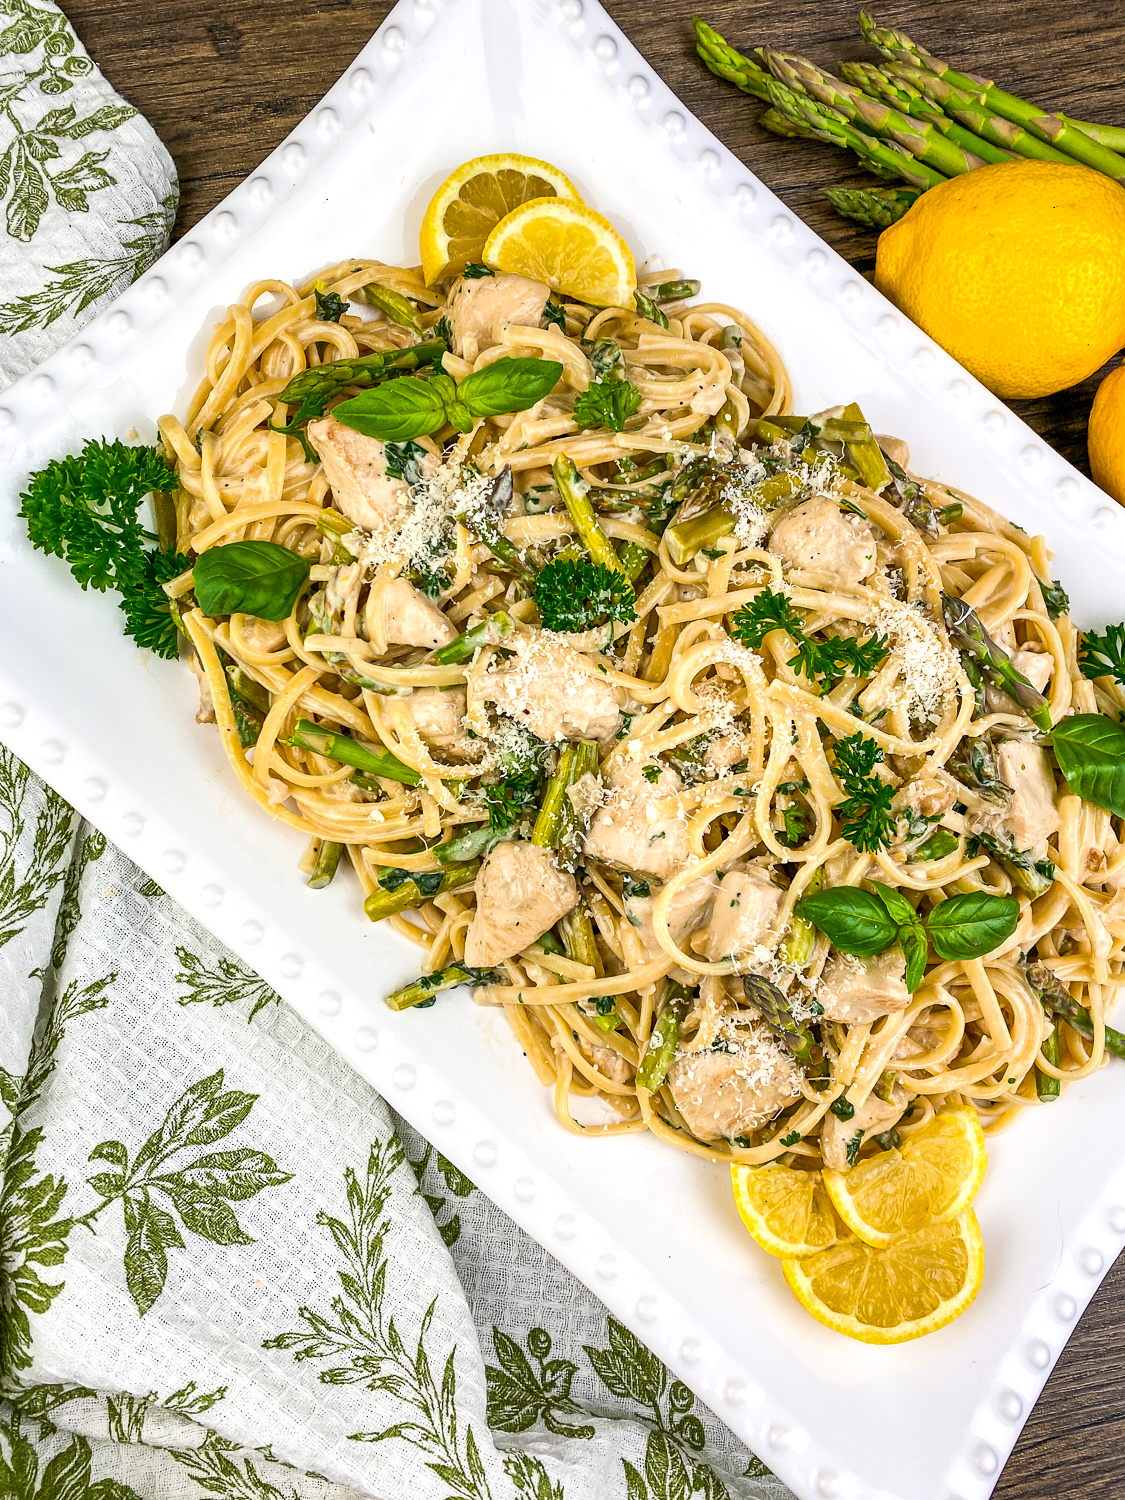 Need a new go-to weeknight recipe? This creamy chicken and asparagus pasta is a must-try! It's easy to make, hearty, and full of flavor.